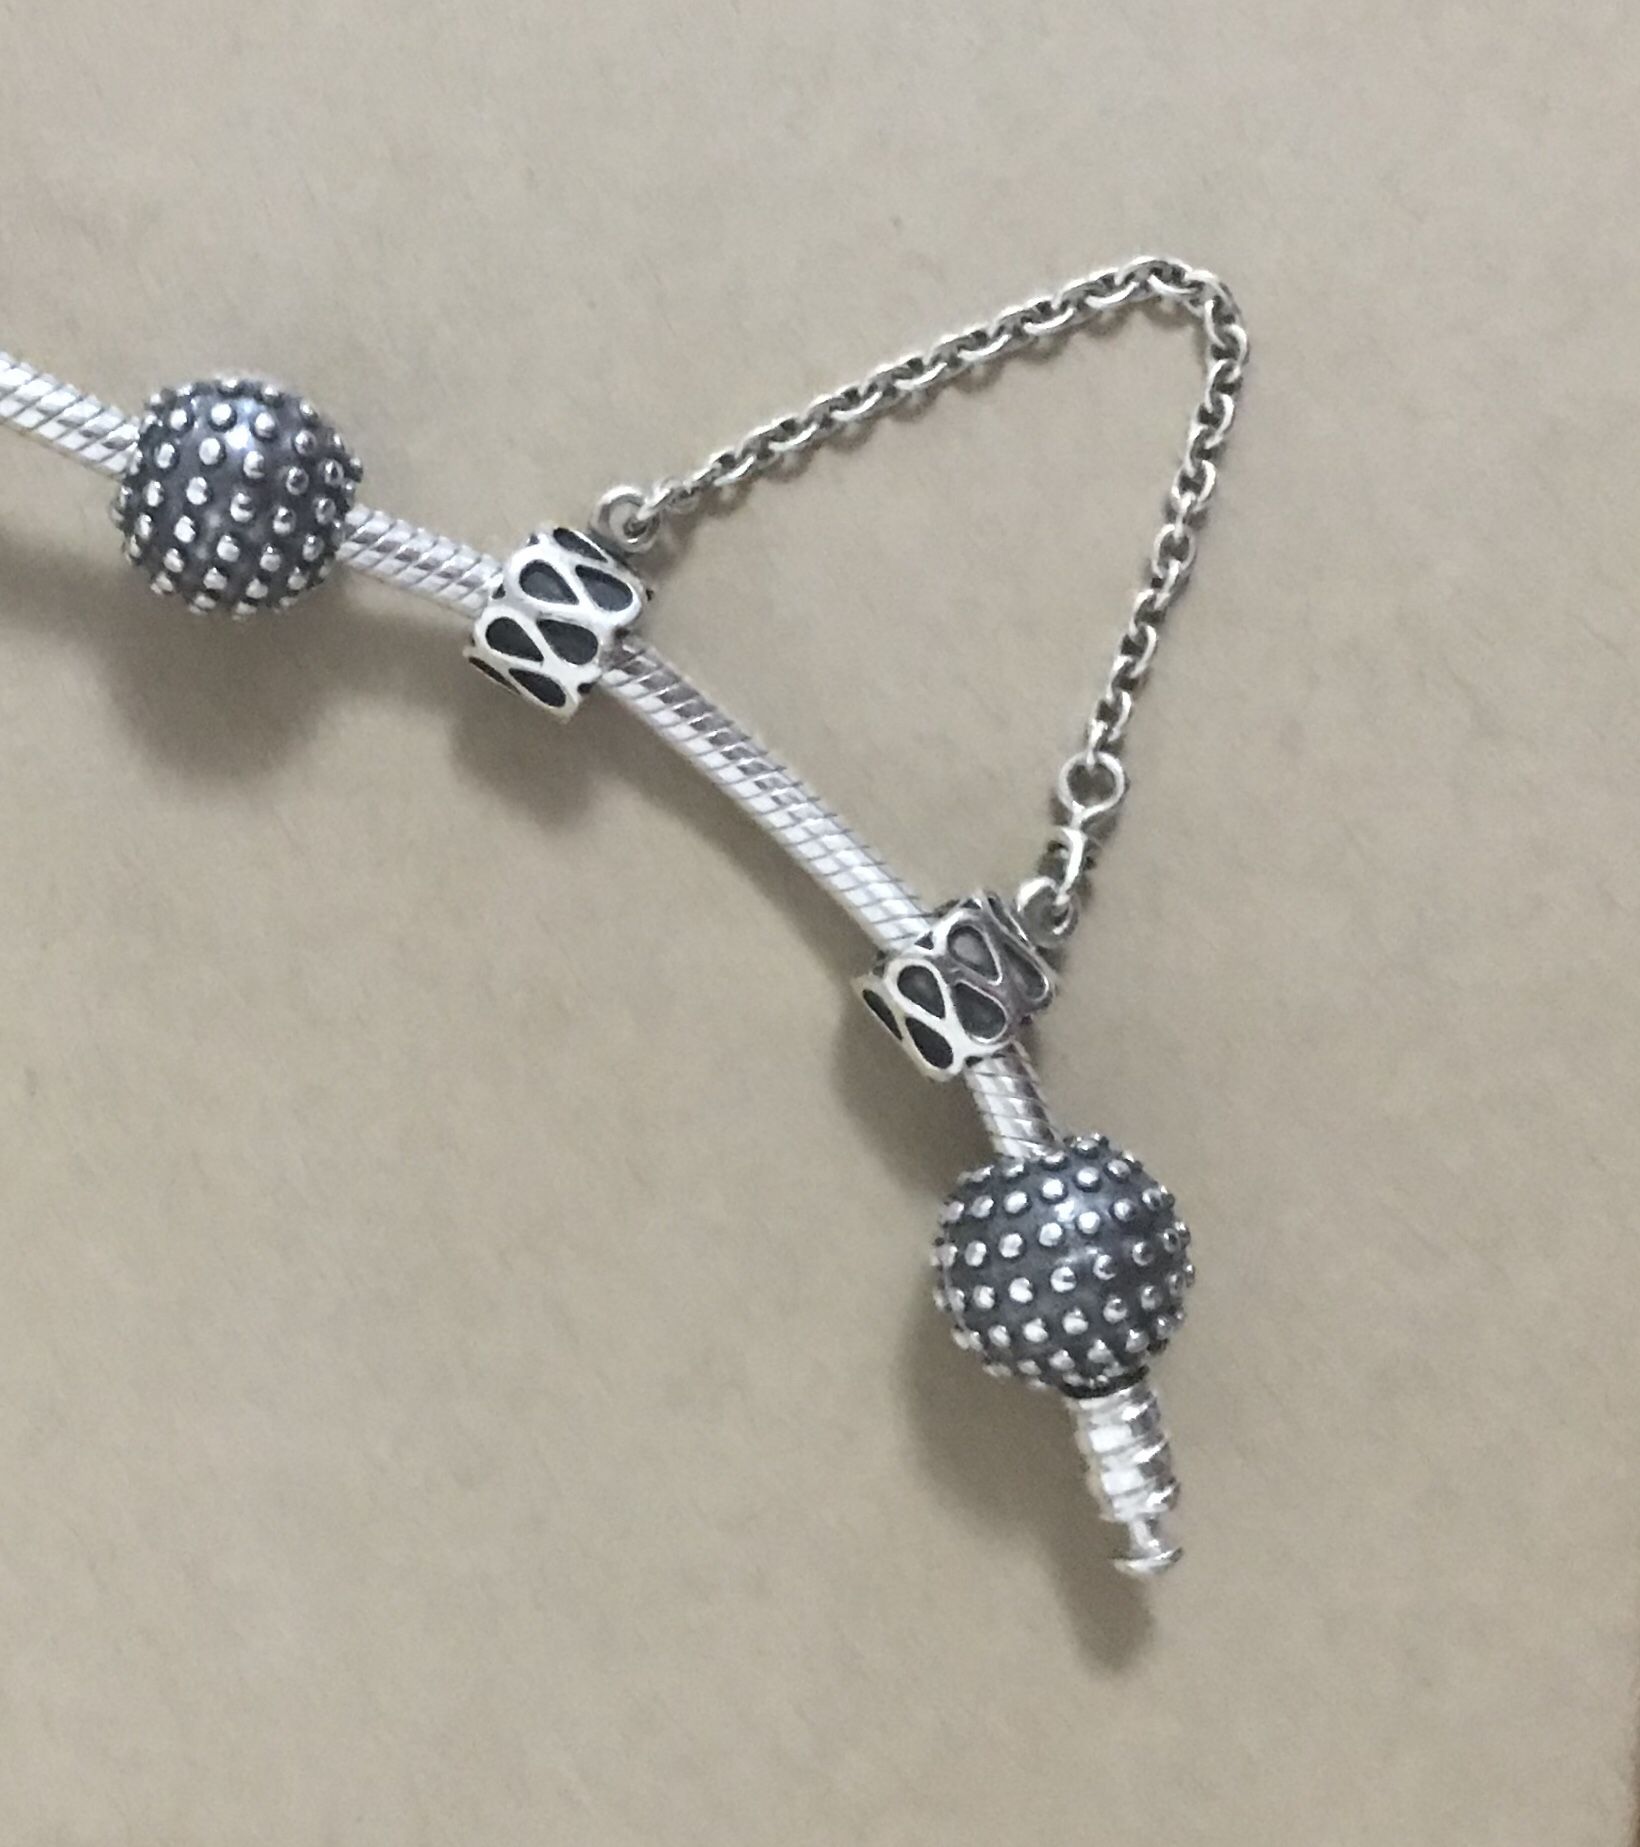 Pandora safety chain and clips for a bracelet